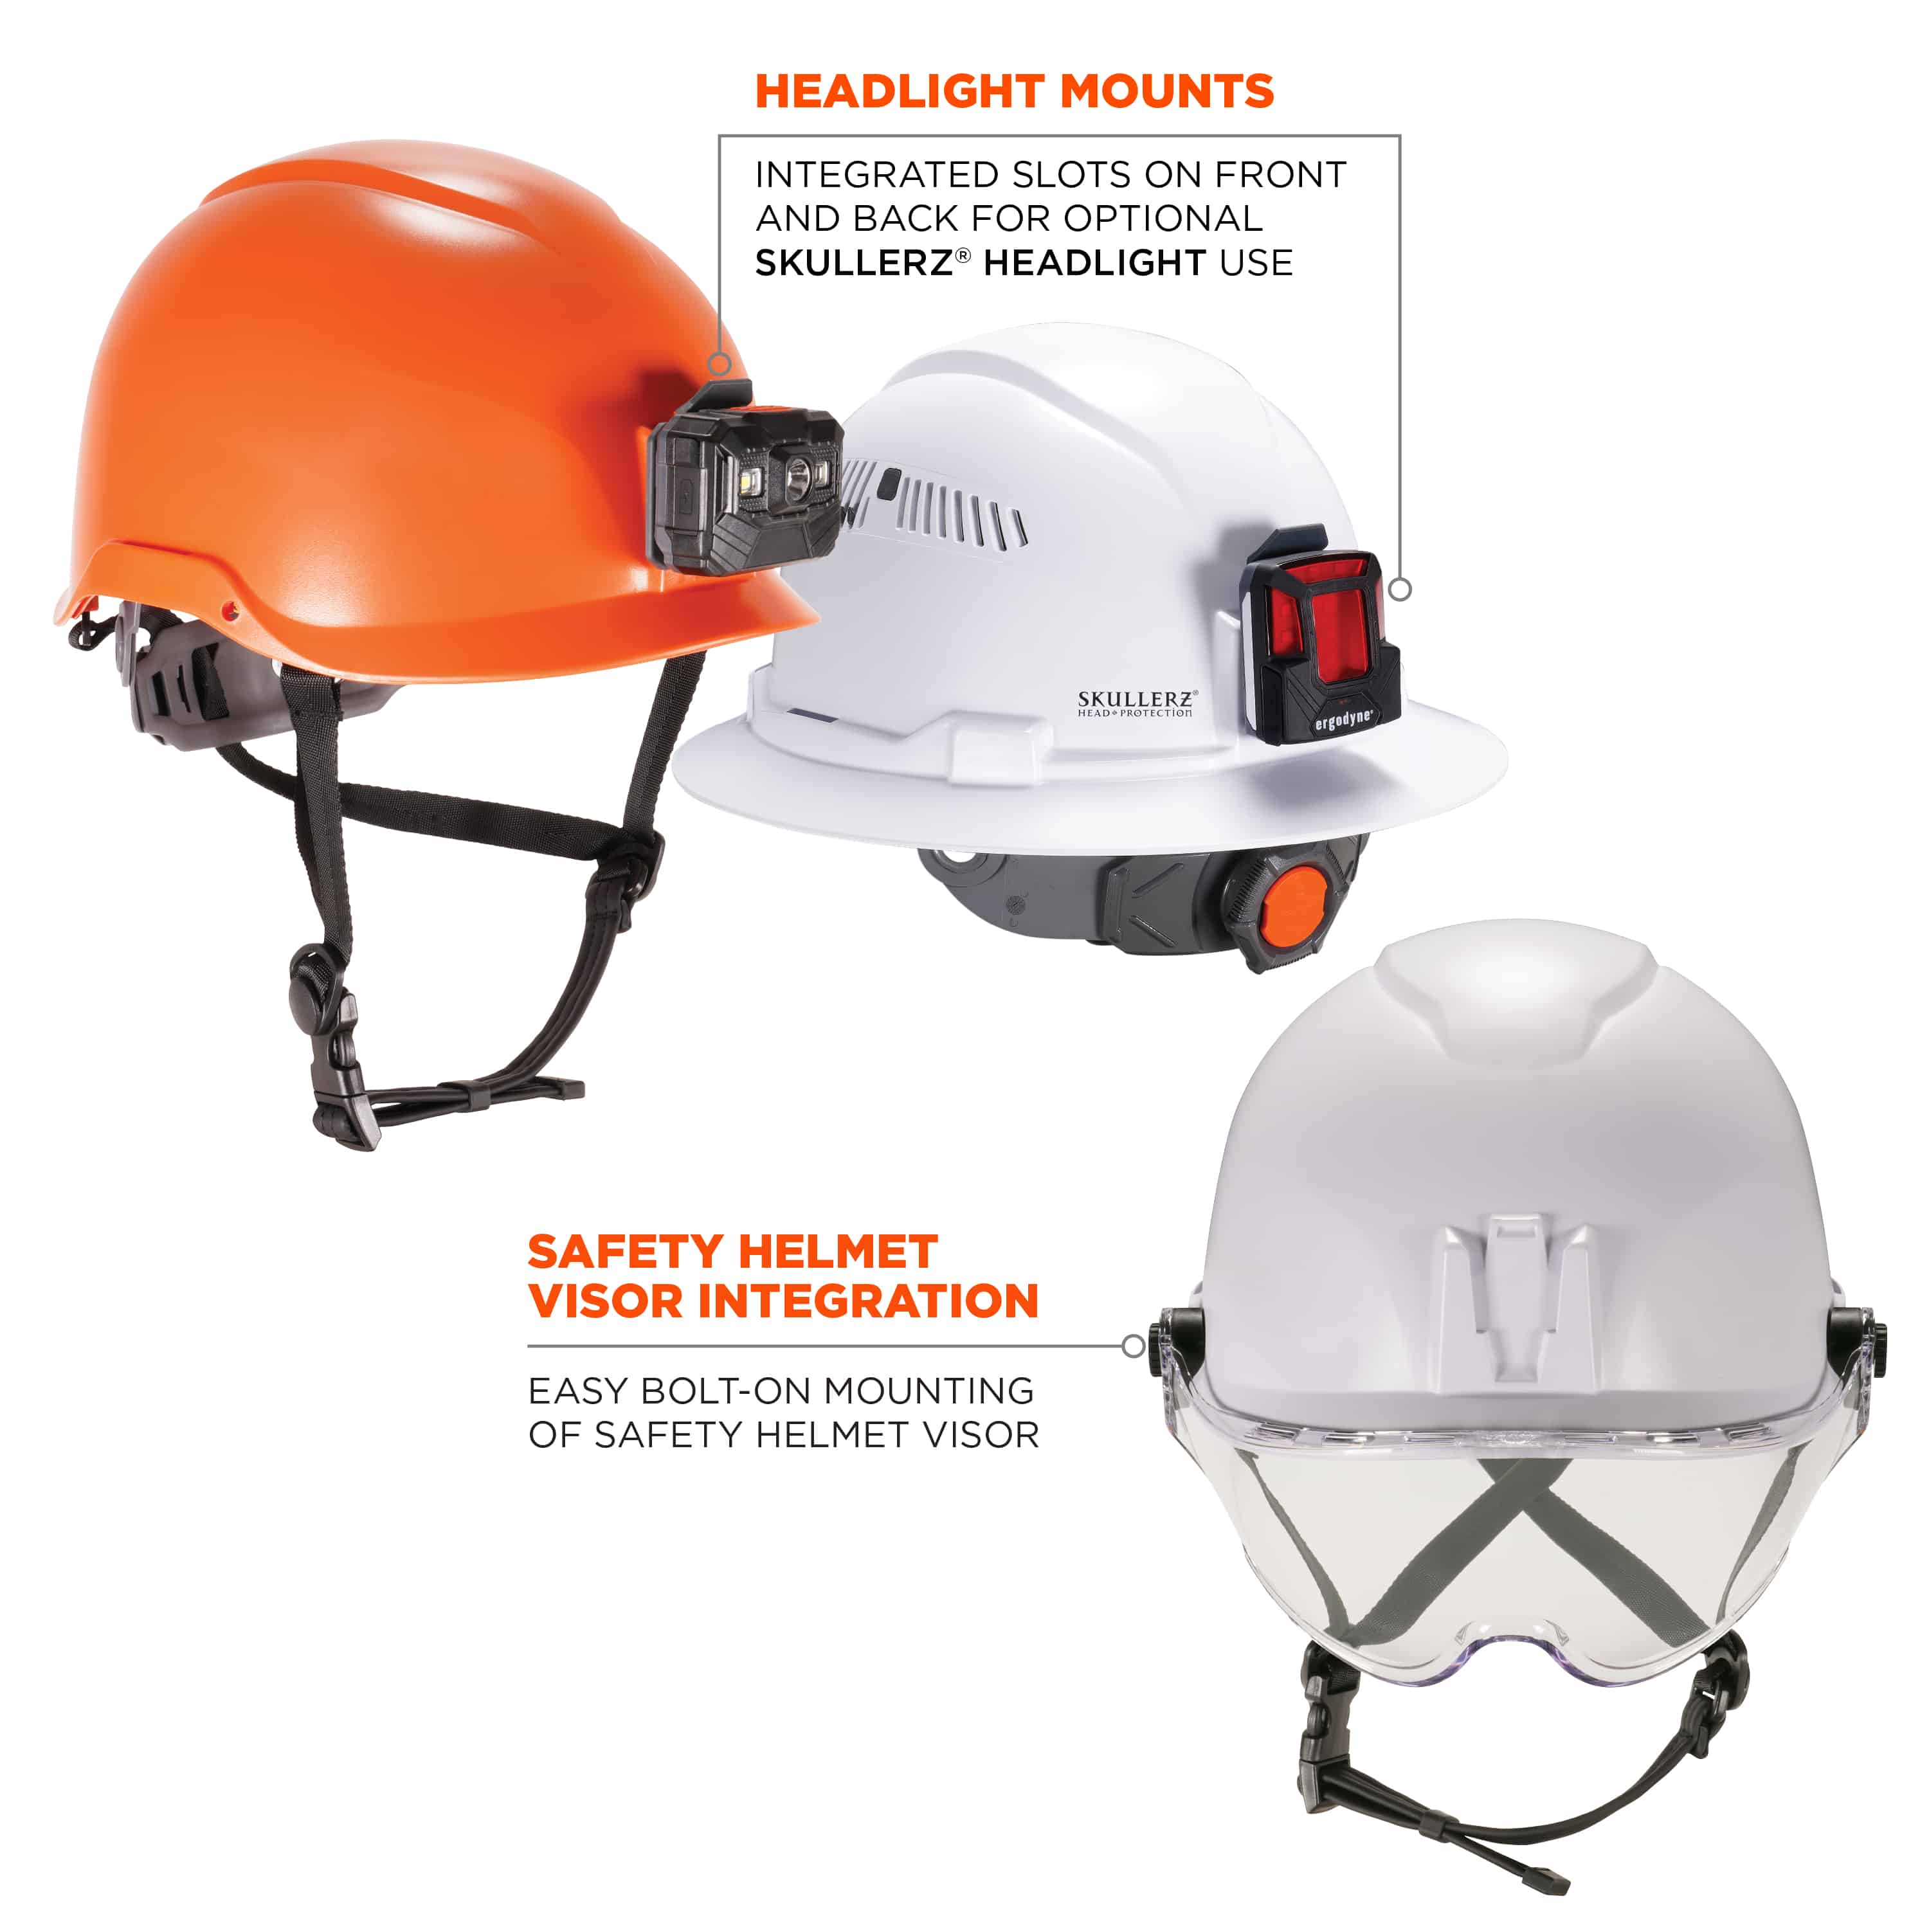 Headlight mounts: integrated slots on front and back of safety helmets and hard hats for optional Skullerz Headlight use. Safety helmet integration: easy-bolt on mounting of safety helmet visors